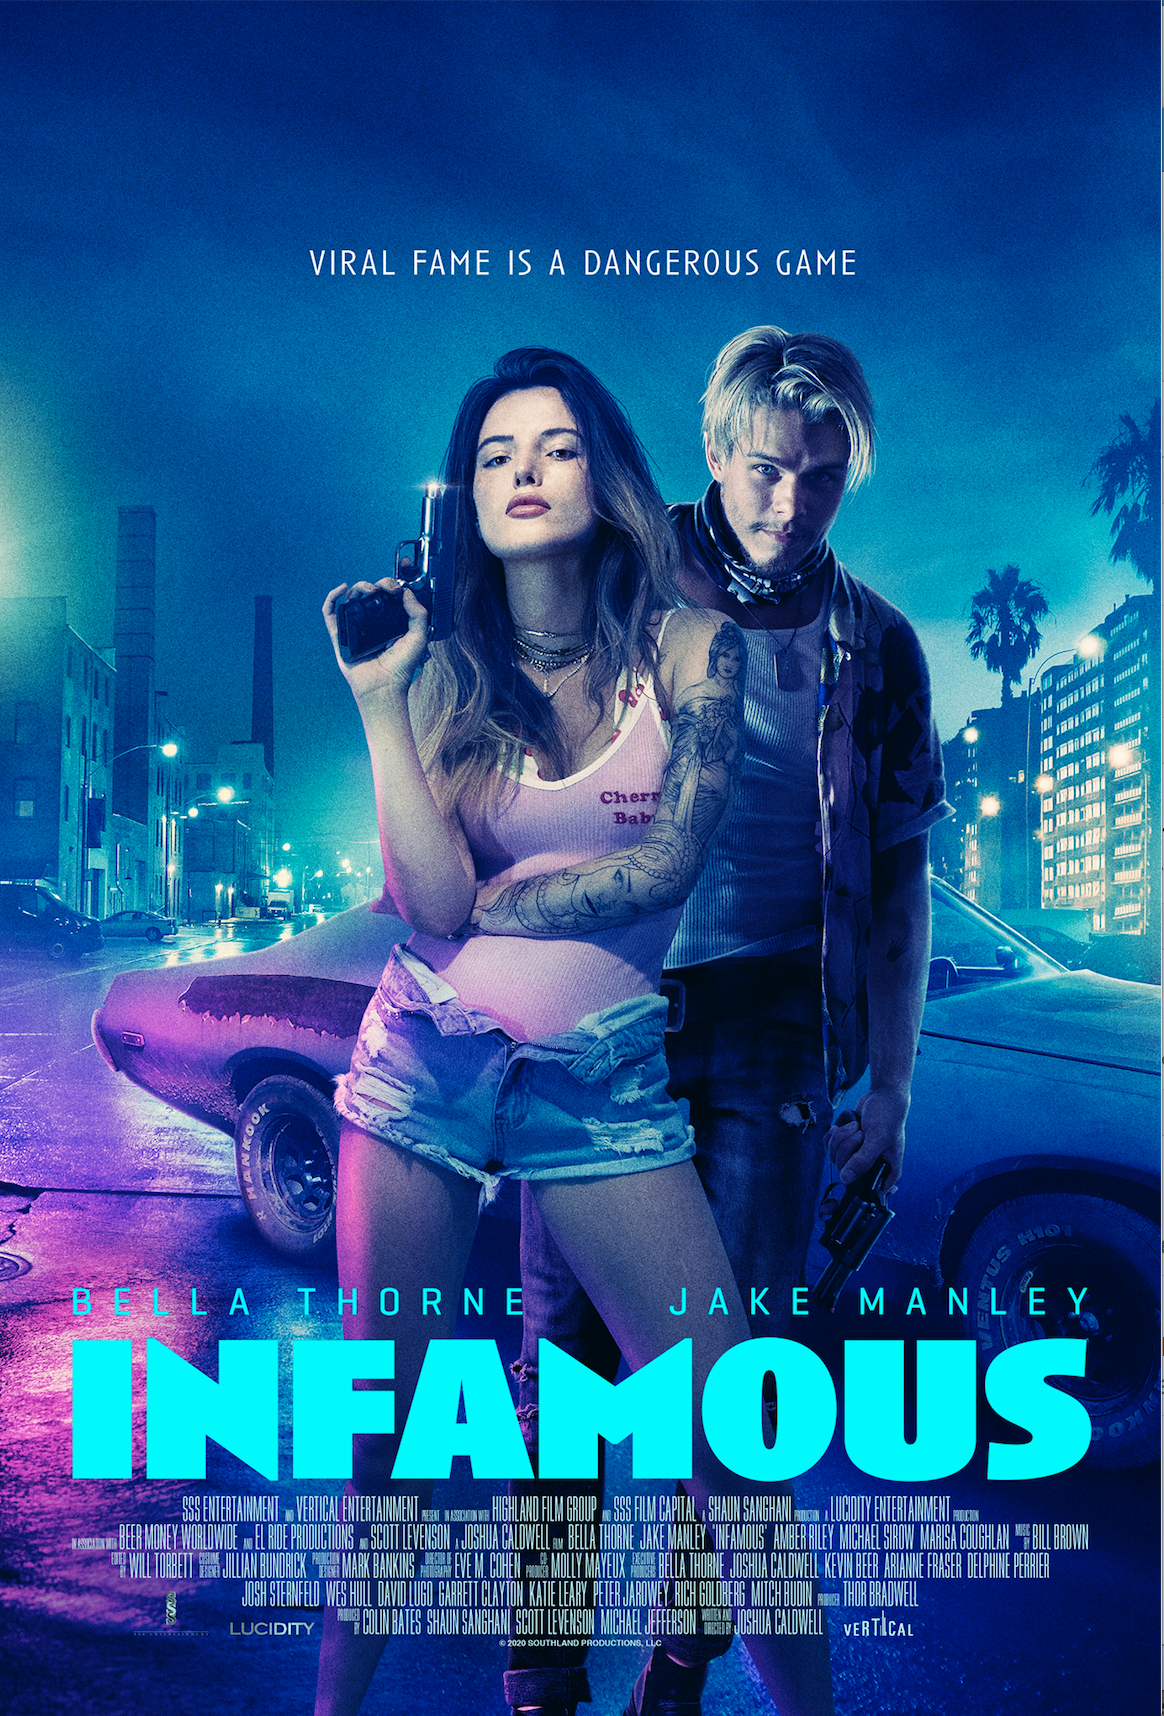 INFAMOUS – Available on VOD/Digital + Select Virtual Cinemas on June 12, 2020